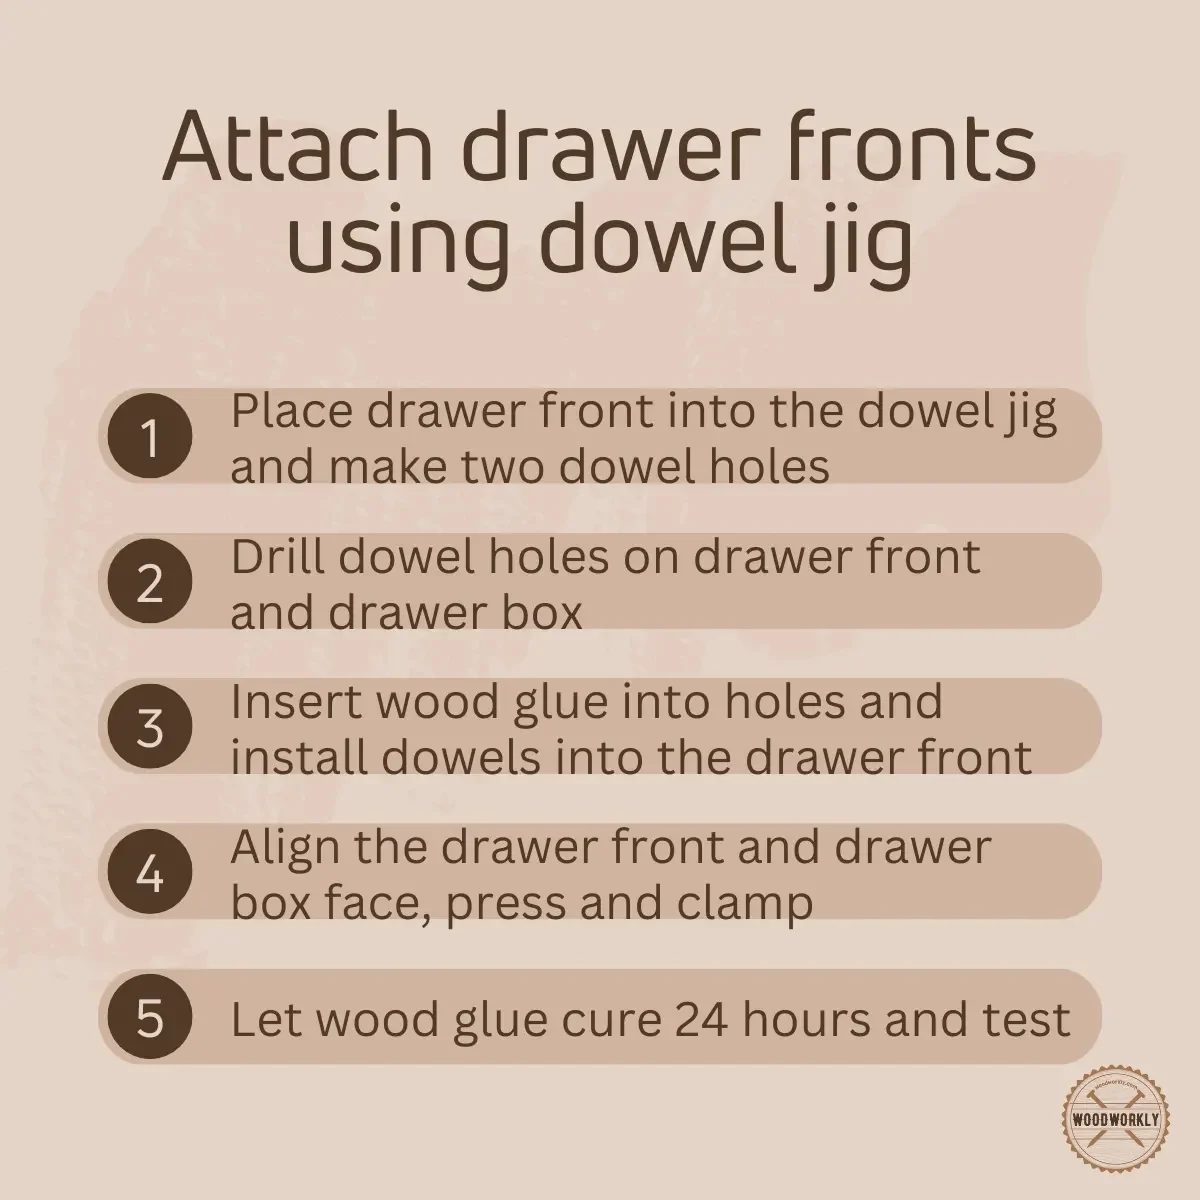 Attach drawer fronts using dowel jig